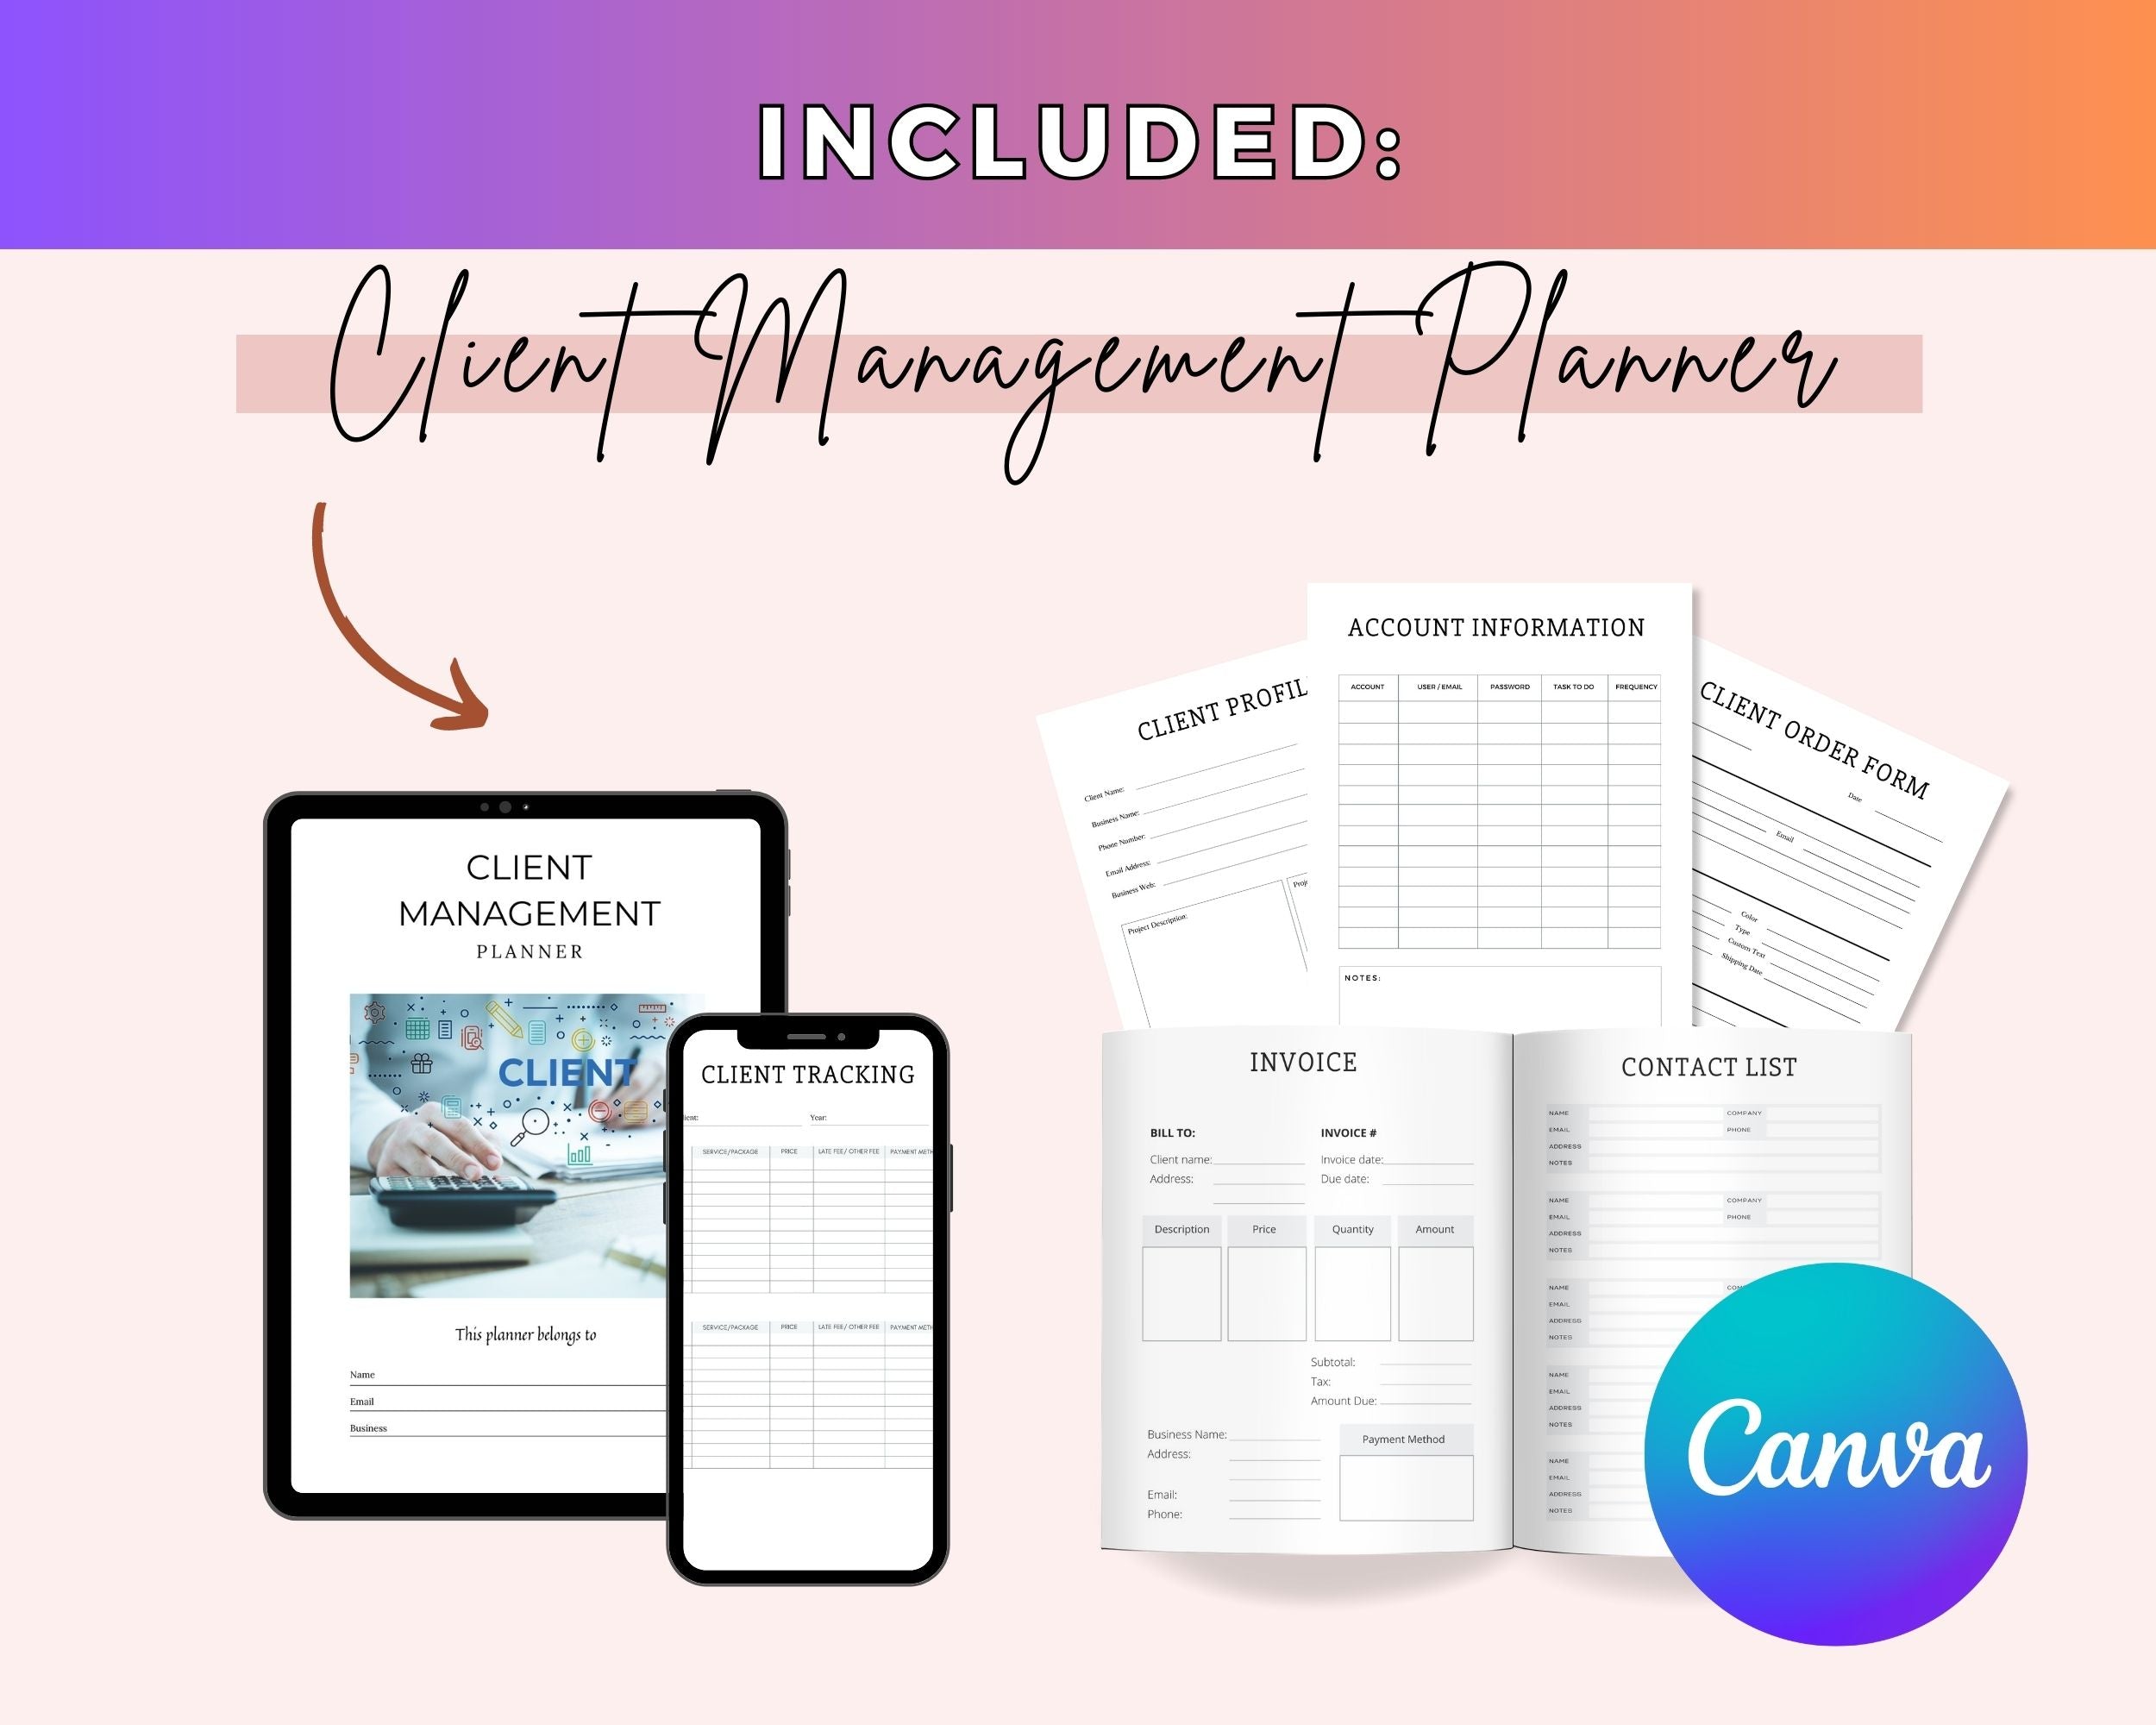 Coaching Business Mini Bundle Kit | For Commercial Use